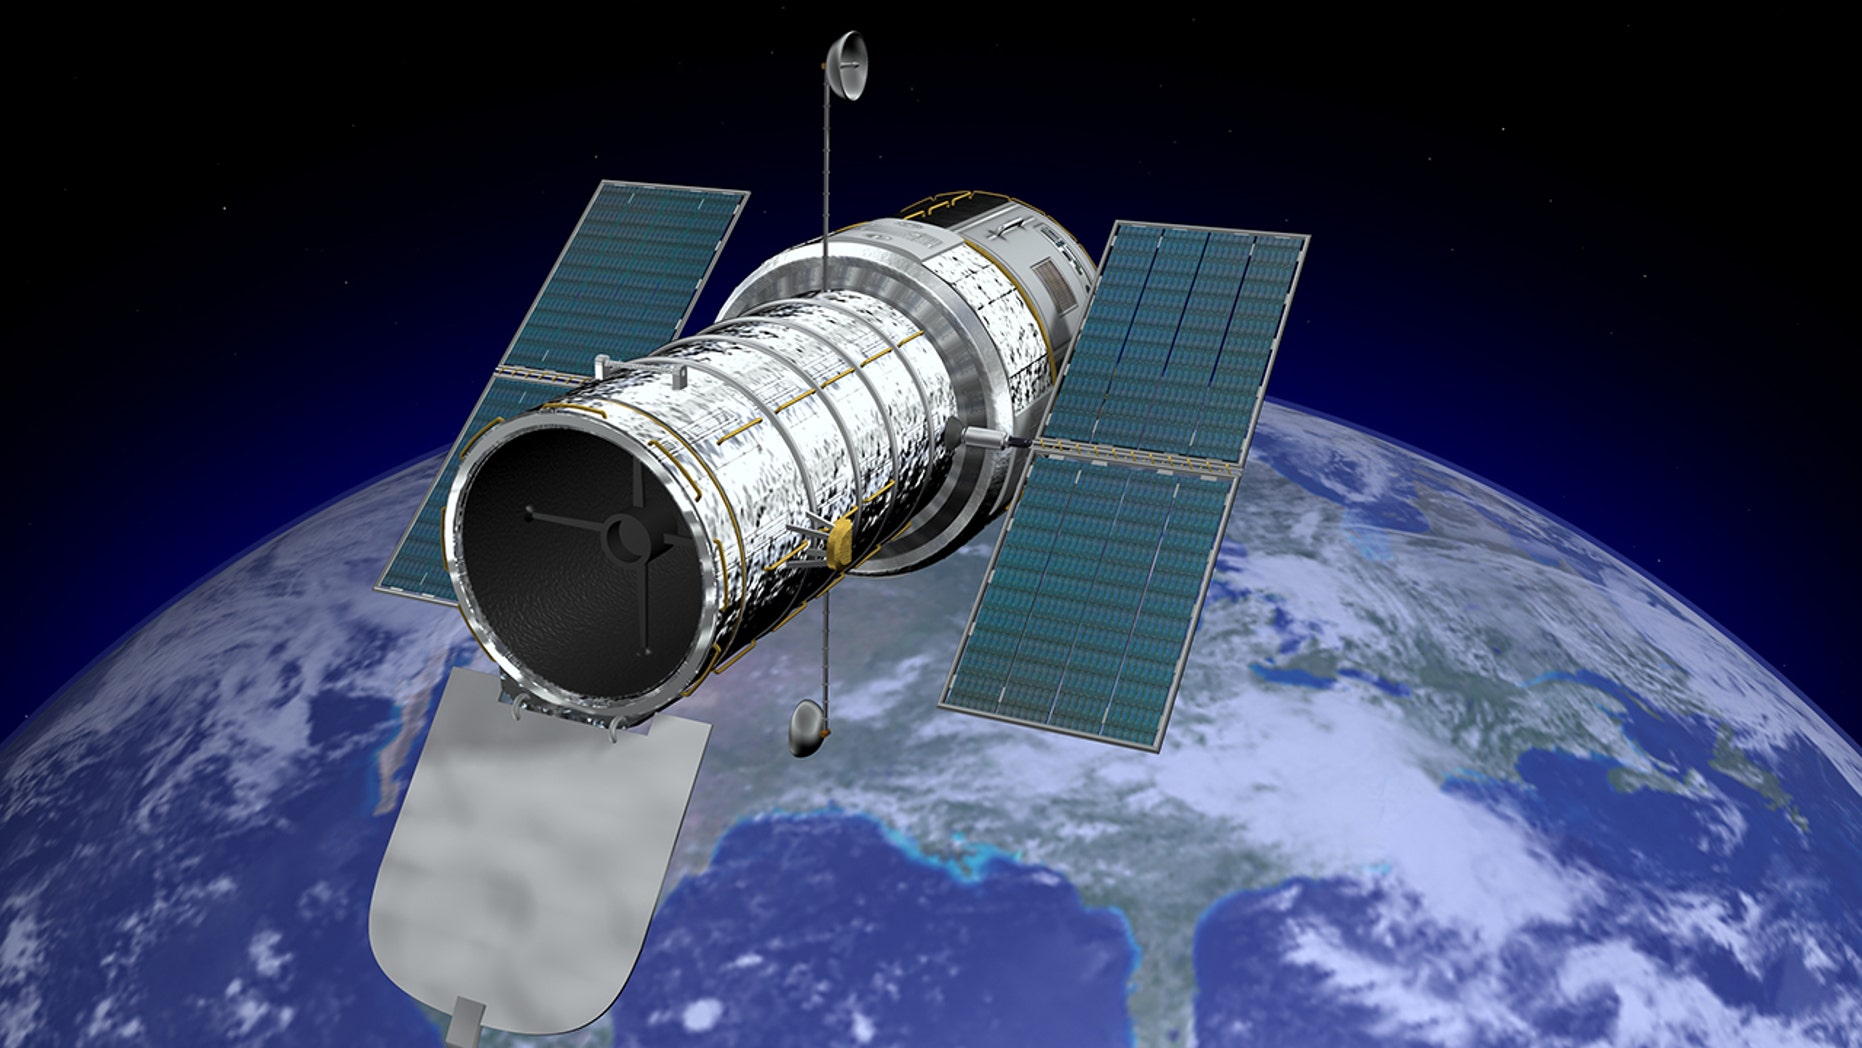 Hubble Space Telescope back to 'normal operations,' NASA says | nSc Science